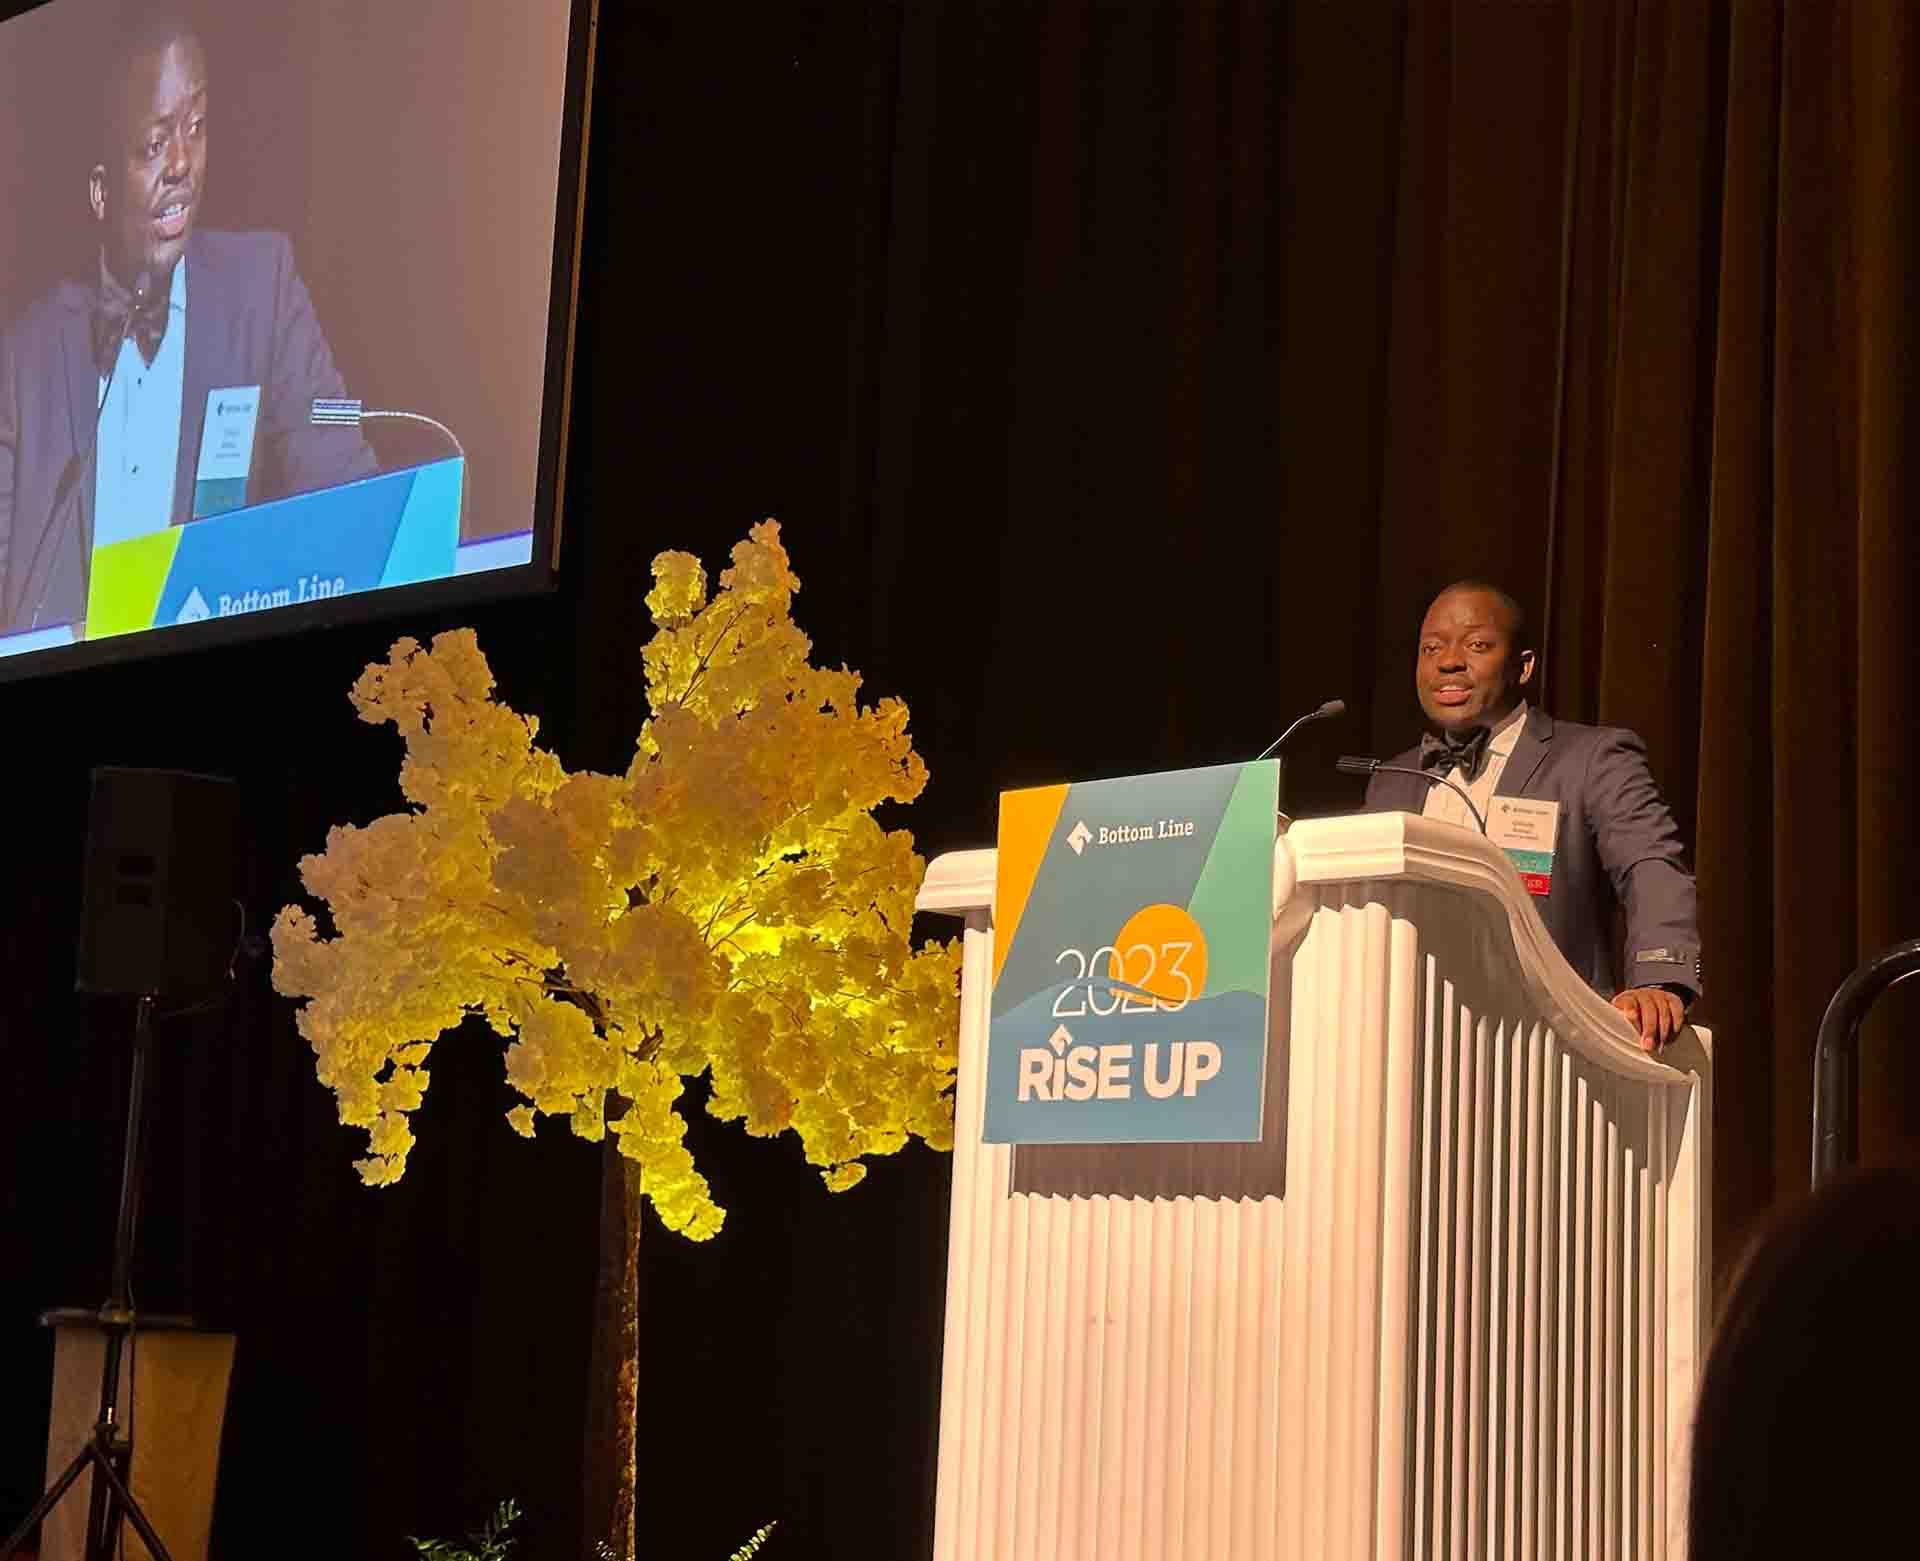 An image of Chiruza Muhimuzi, Vertex Science Leader Scholar and student at the University of Massachusetts, speaking at Bottom Line’s annual Rise Up Gala